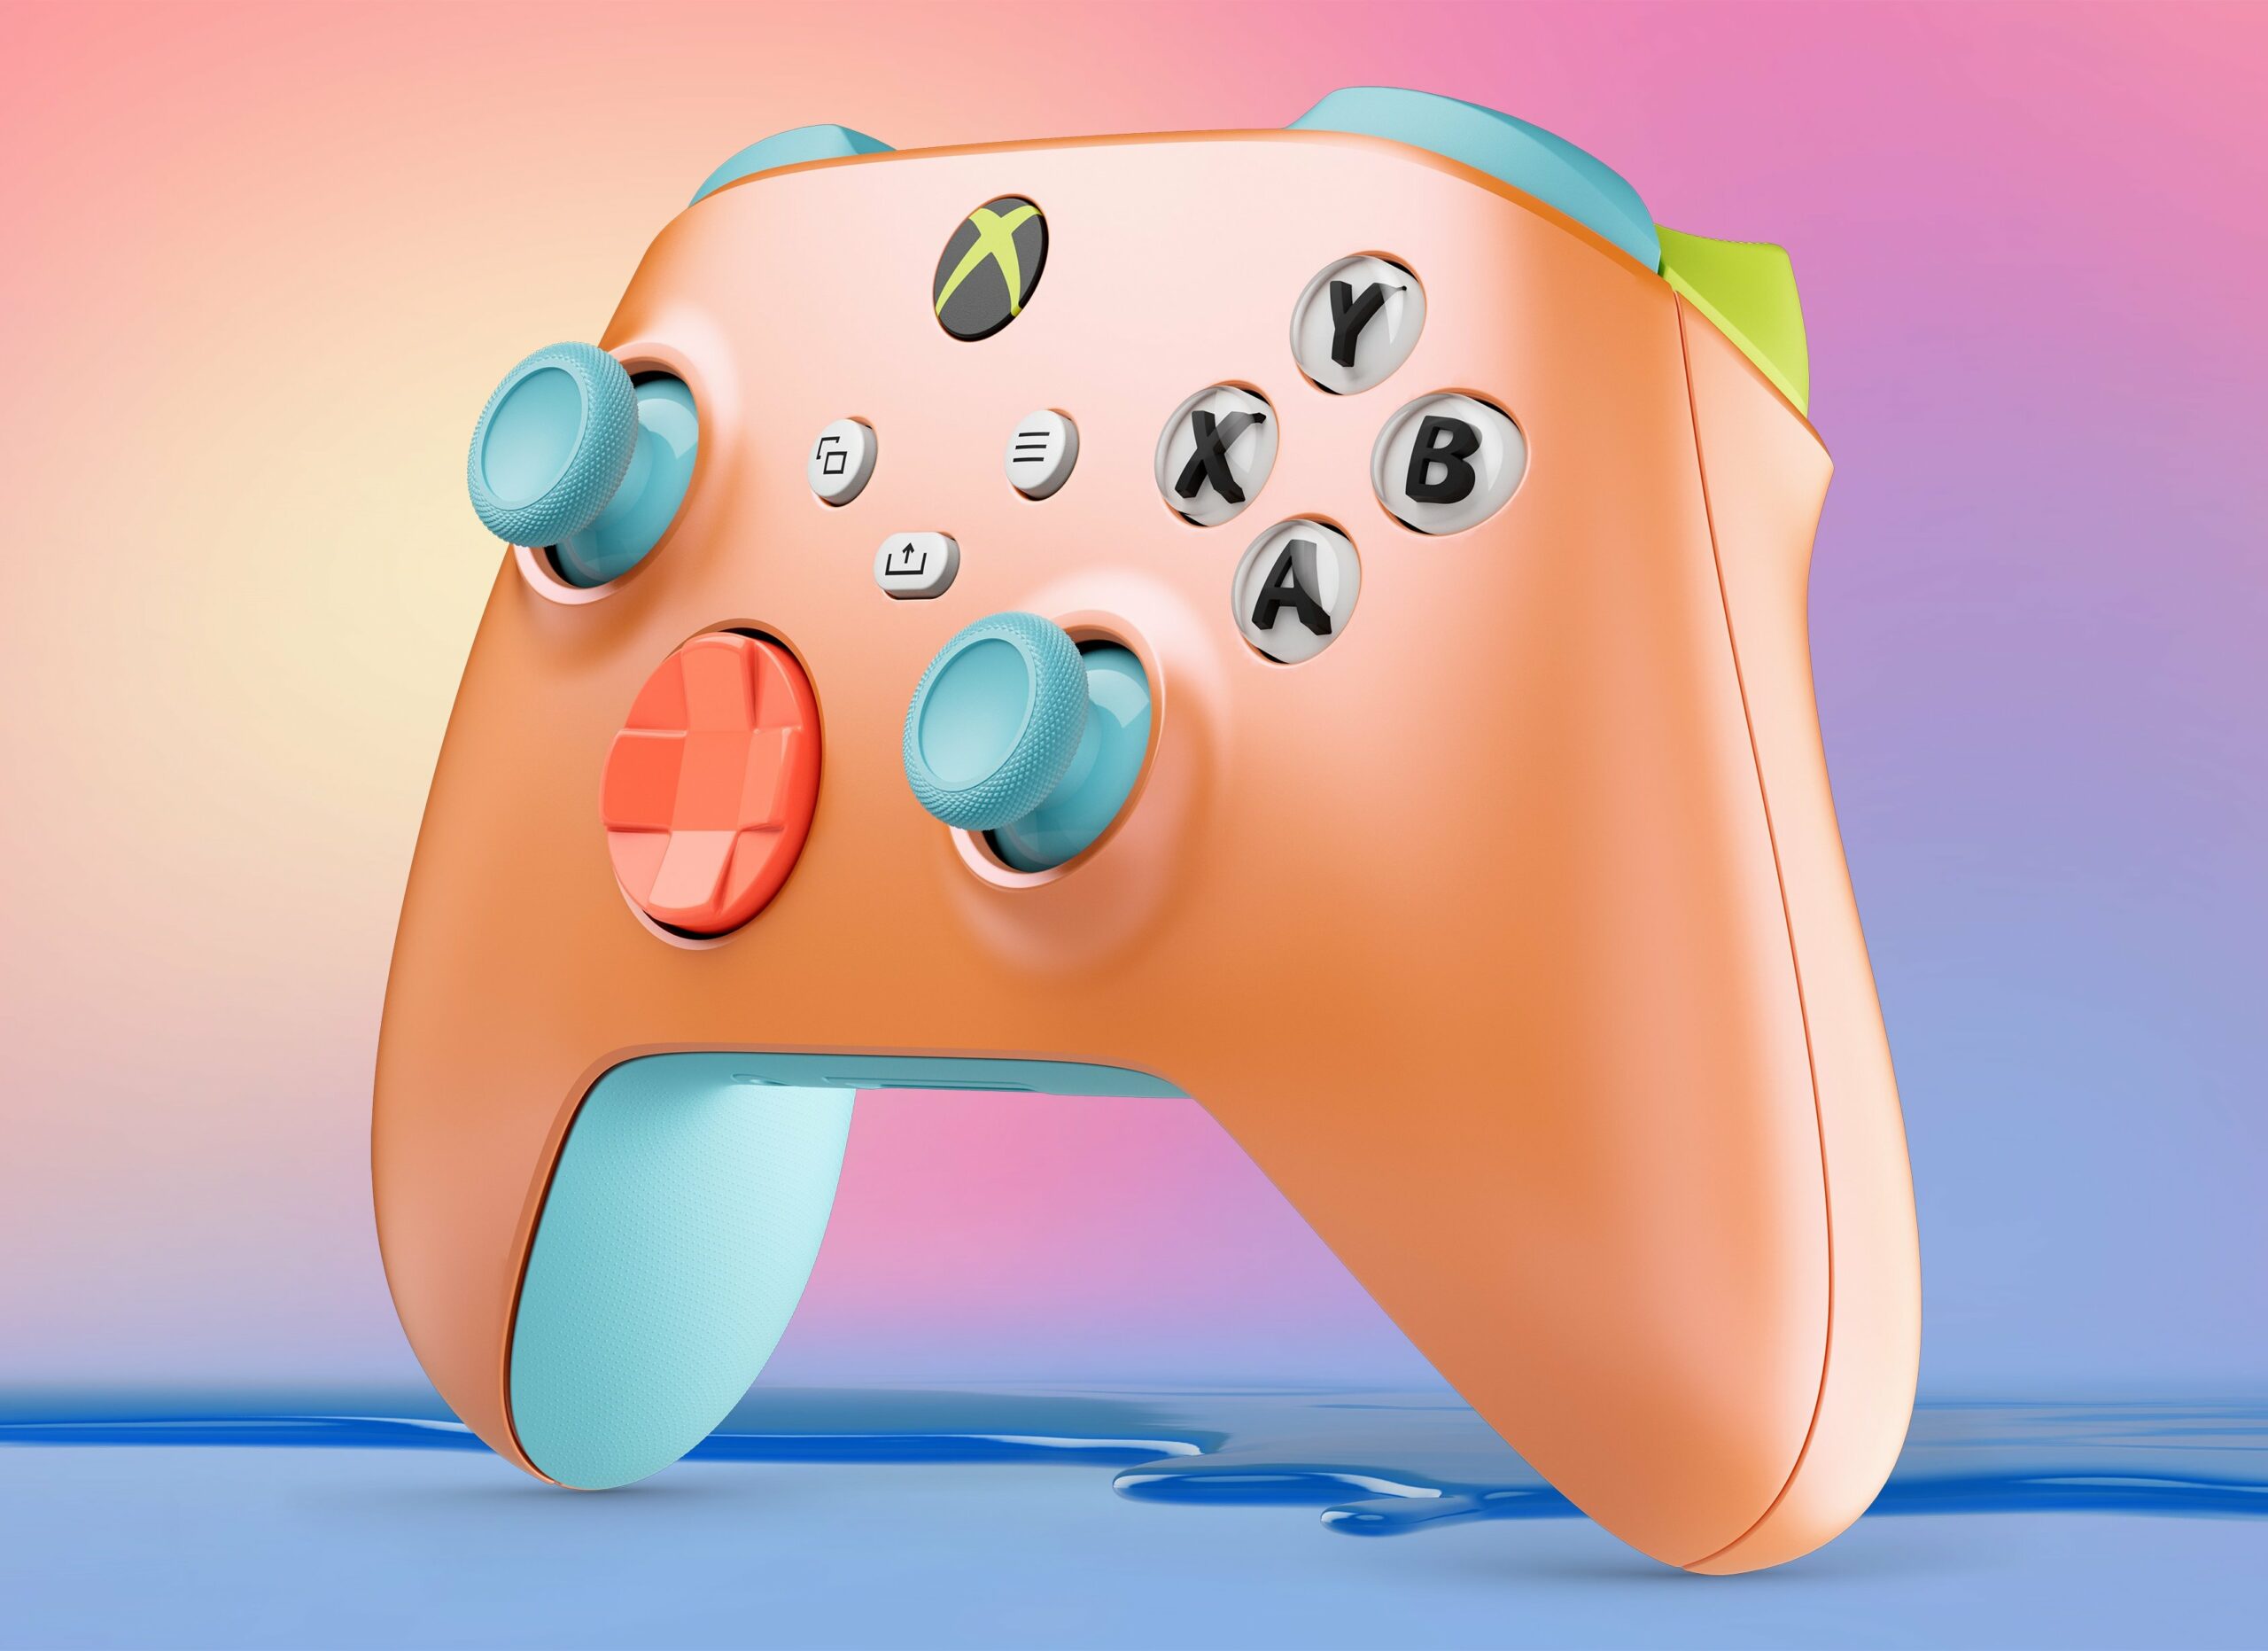 Manette-Xbox-OPI-Sunkissed-Vibes